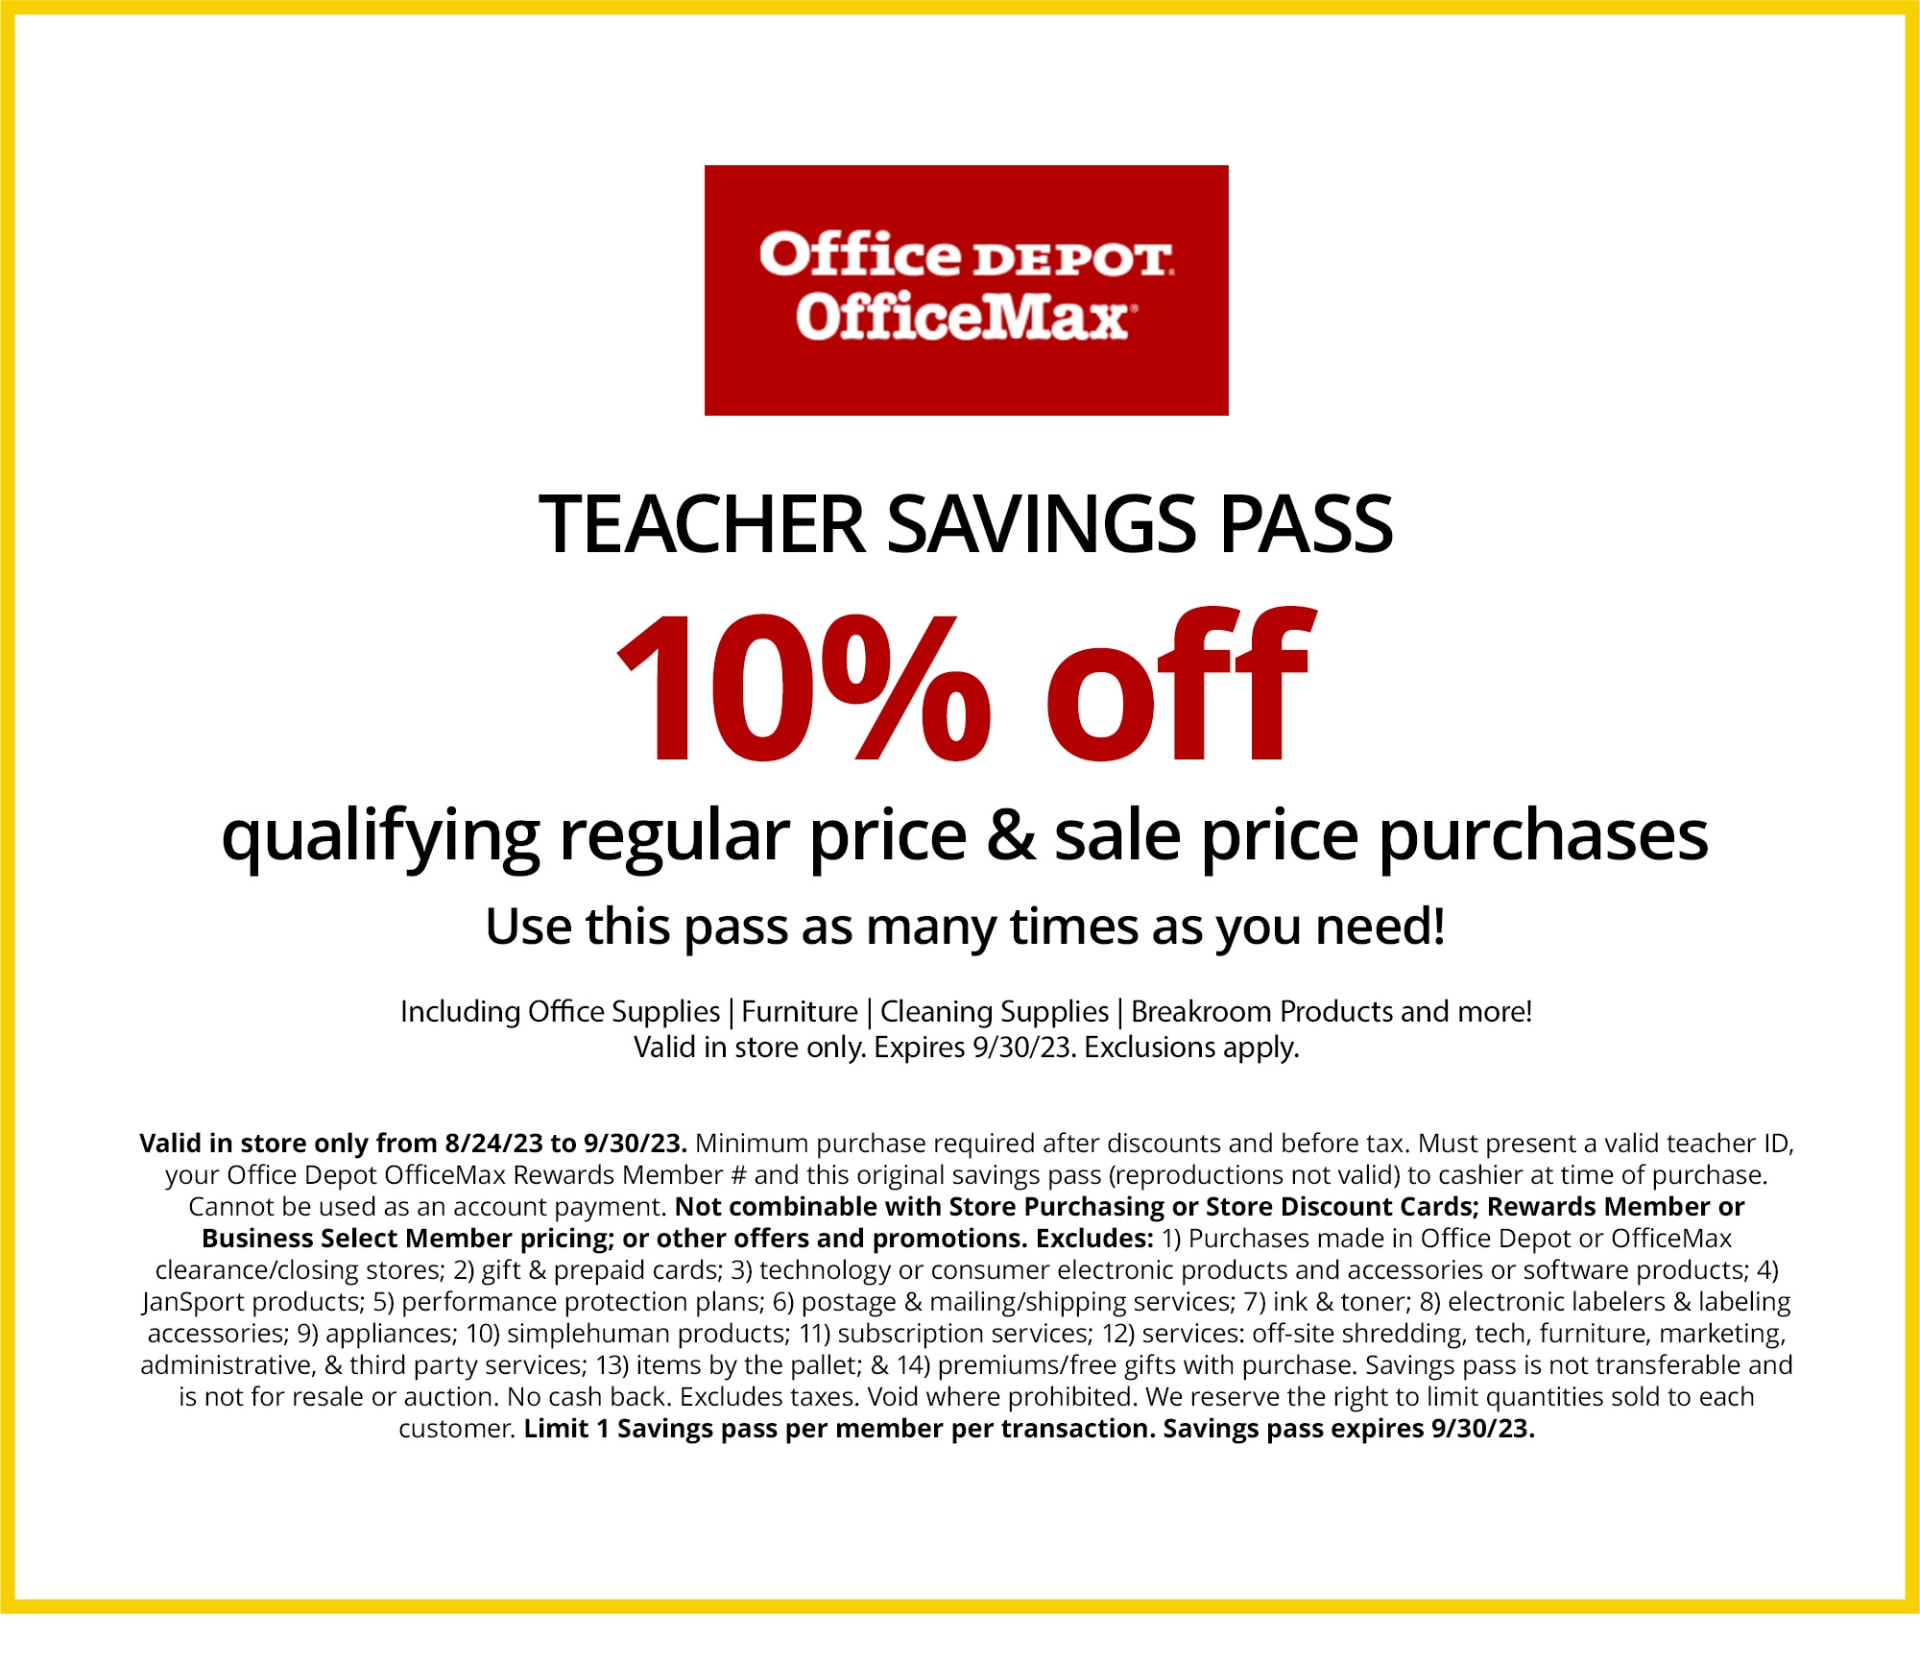 10% off on qualifying purchase.